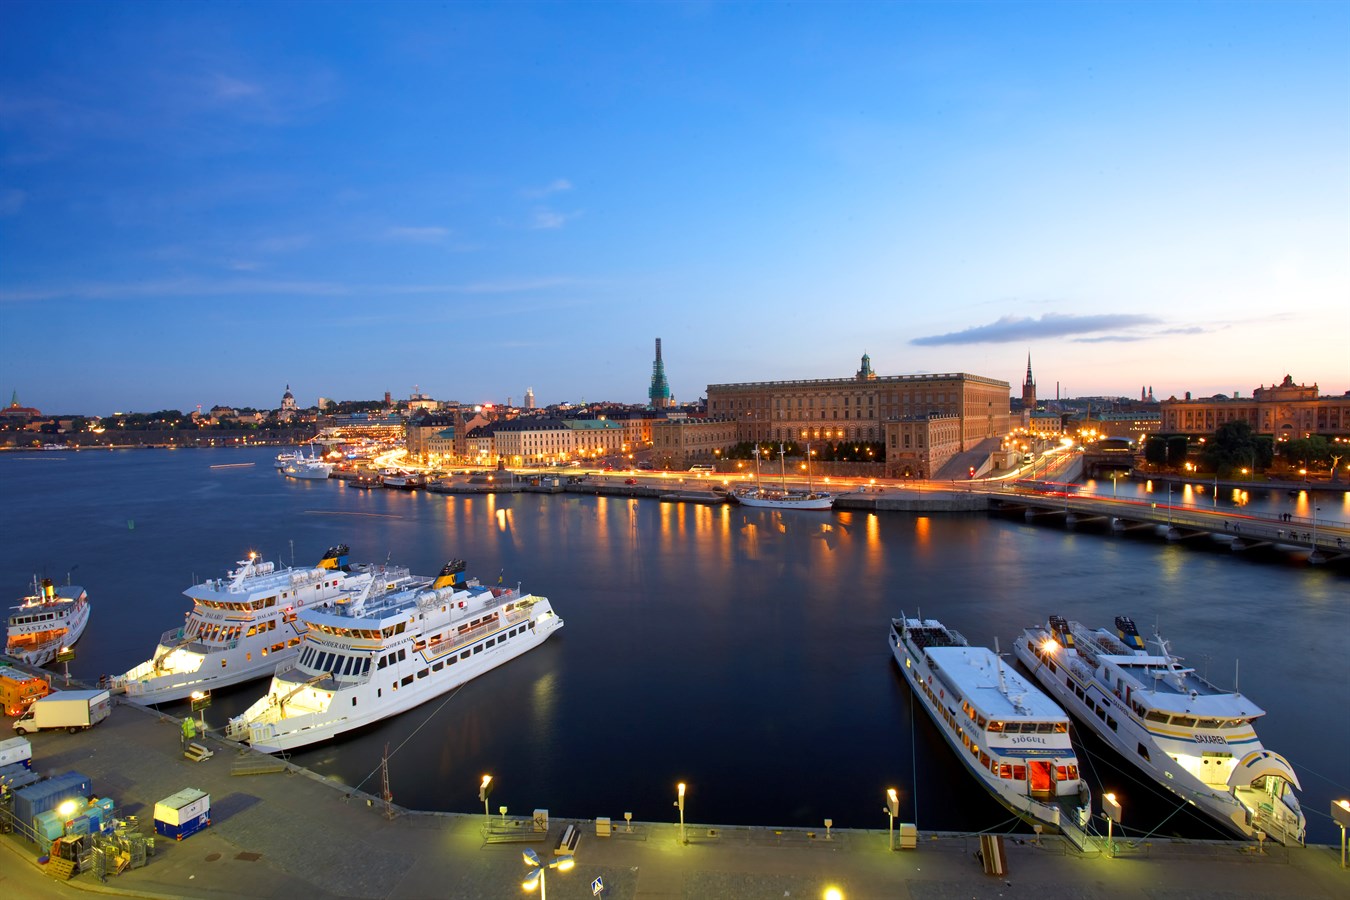 Stockholm by night. The capital of Sweden has been announced as a stop-over for the Volvo Ocean Race 2008-09